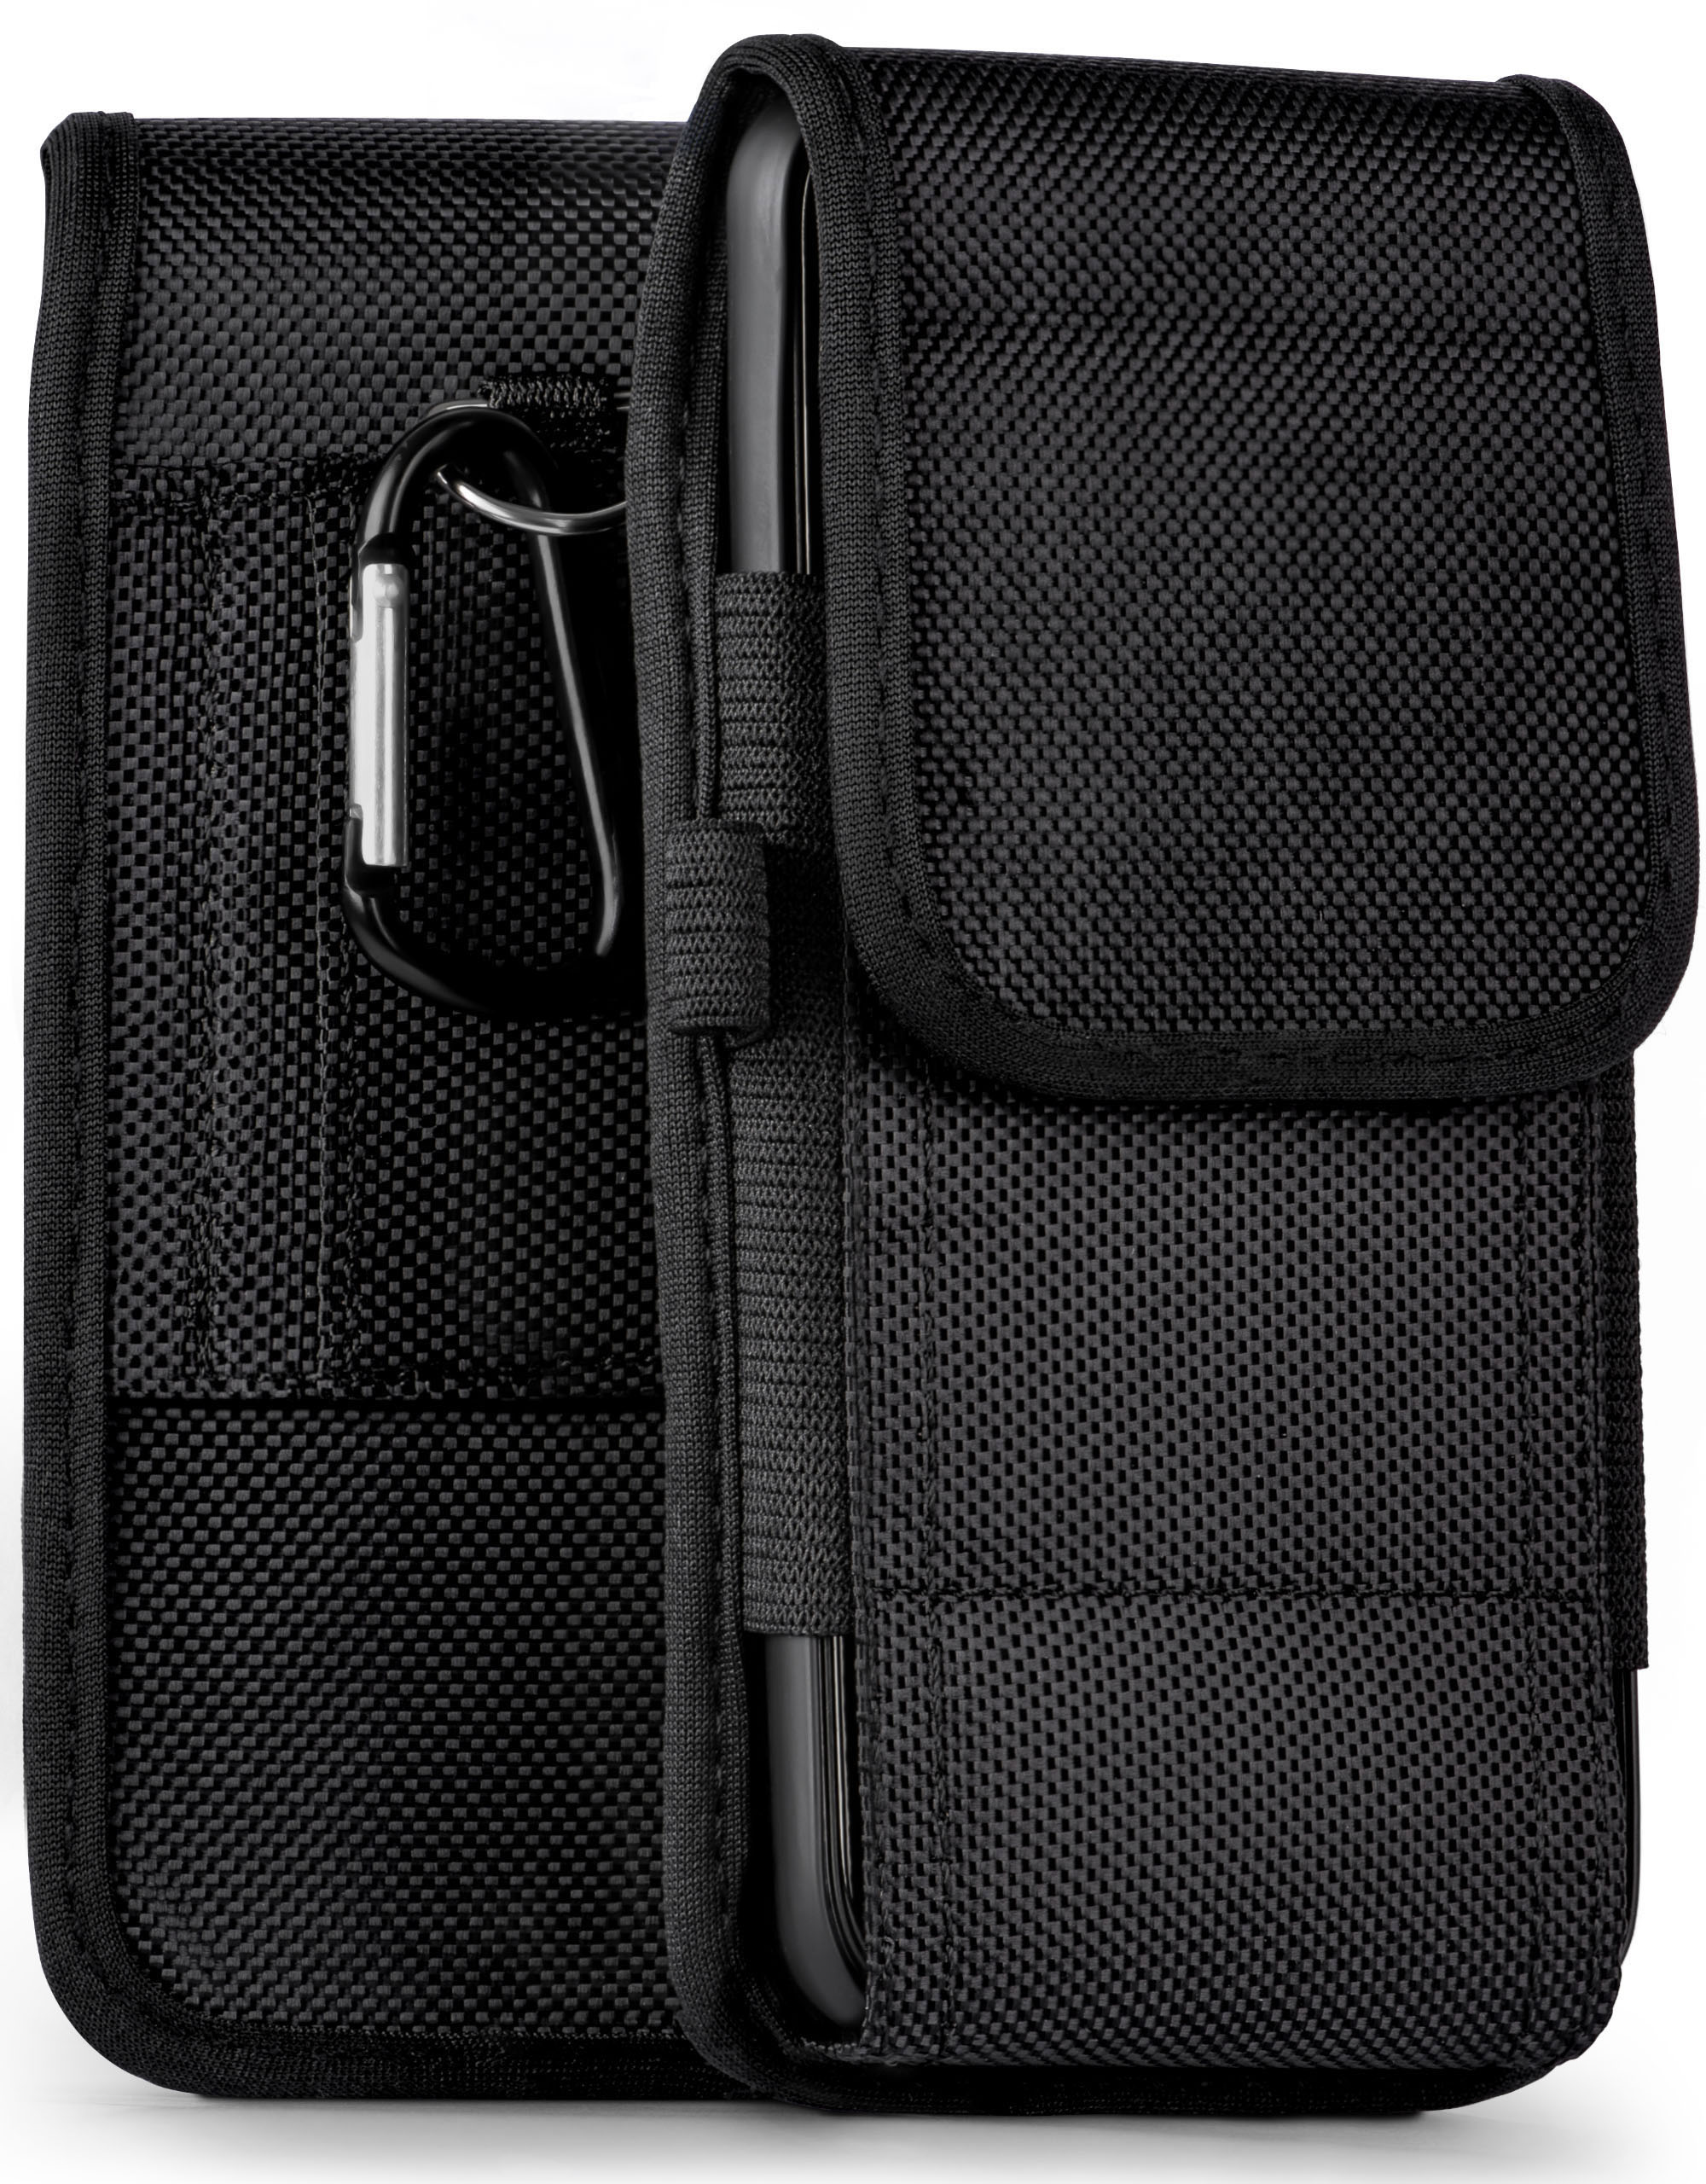 Case, Holster, Trail Lite, P10 Huawei, Agility MOEX